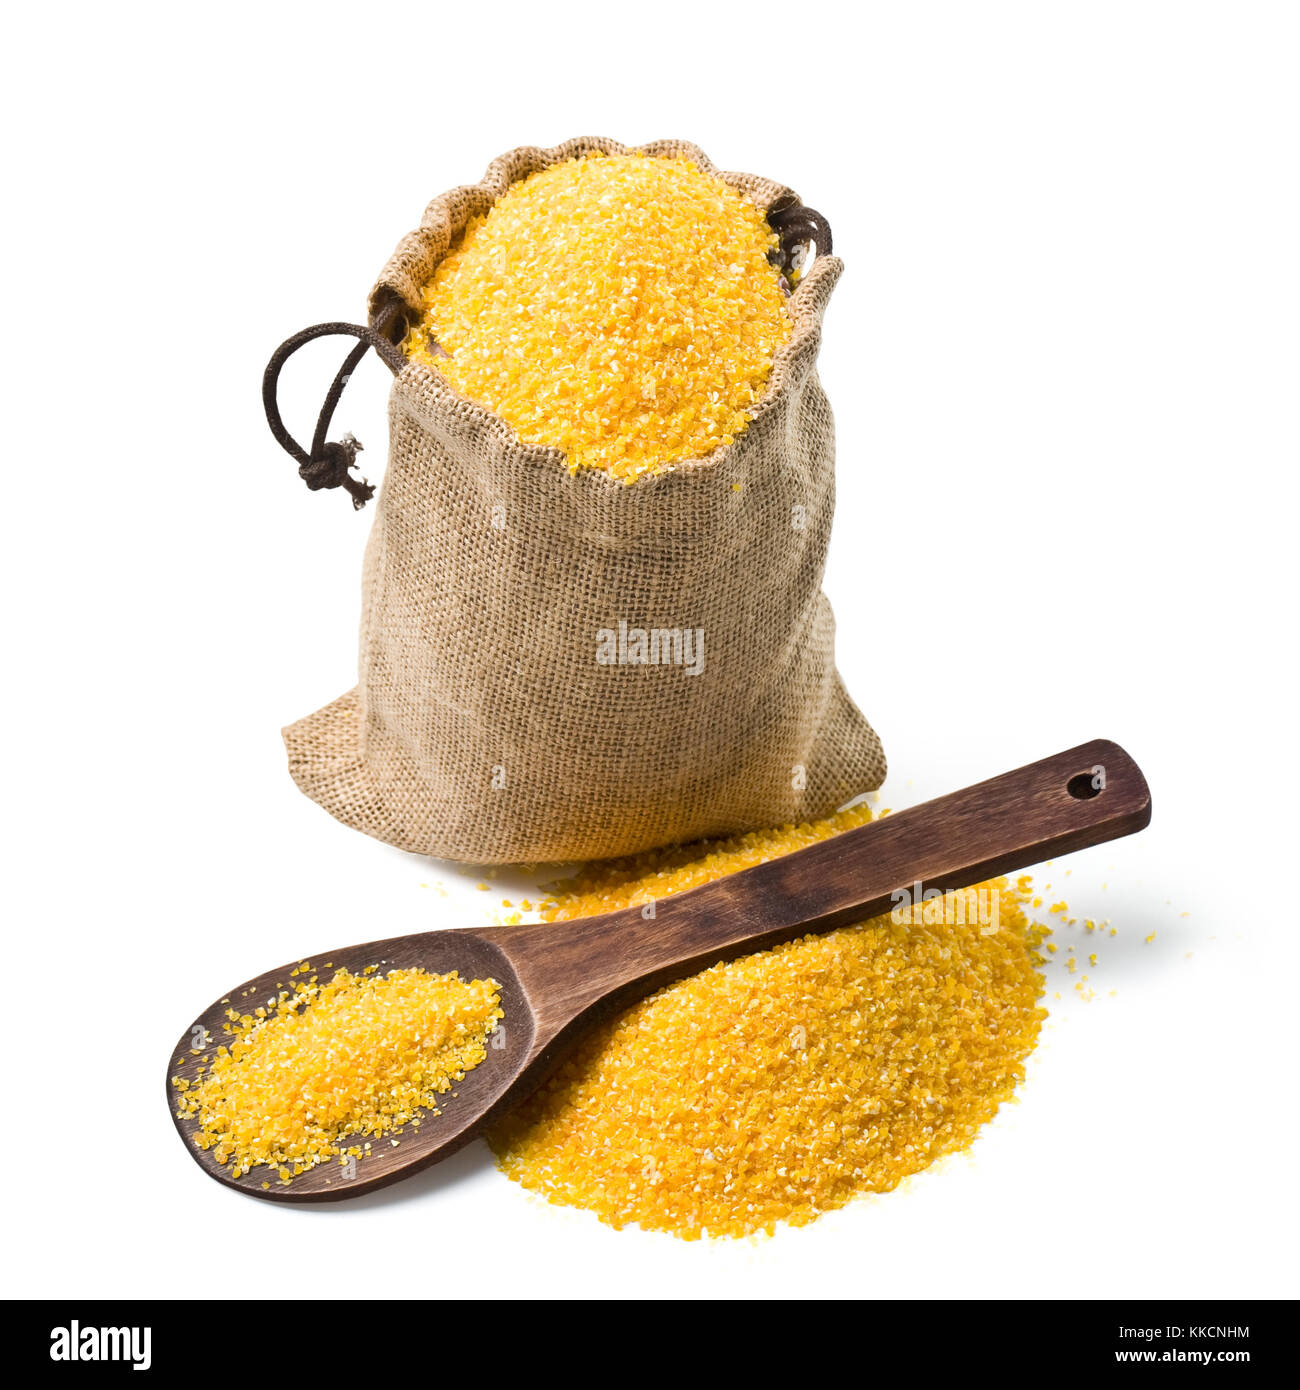 bag of ground corn and a wooden spoon on a white background. keeping paths Stock Photo